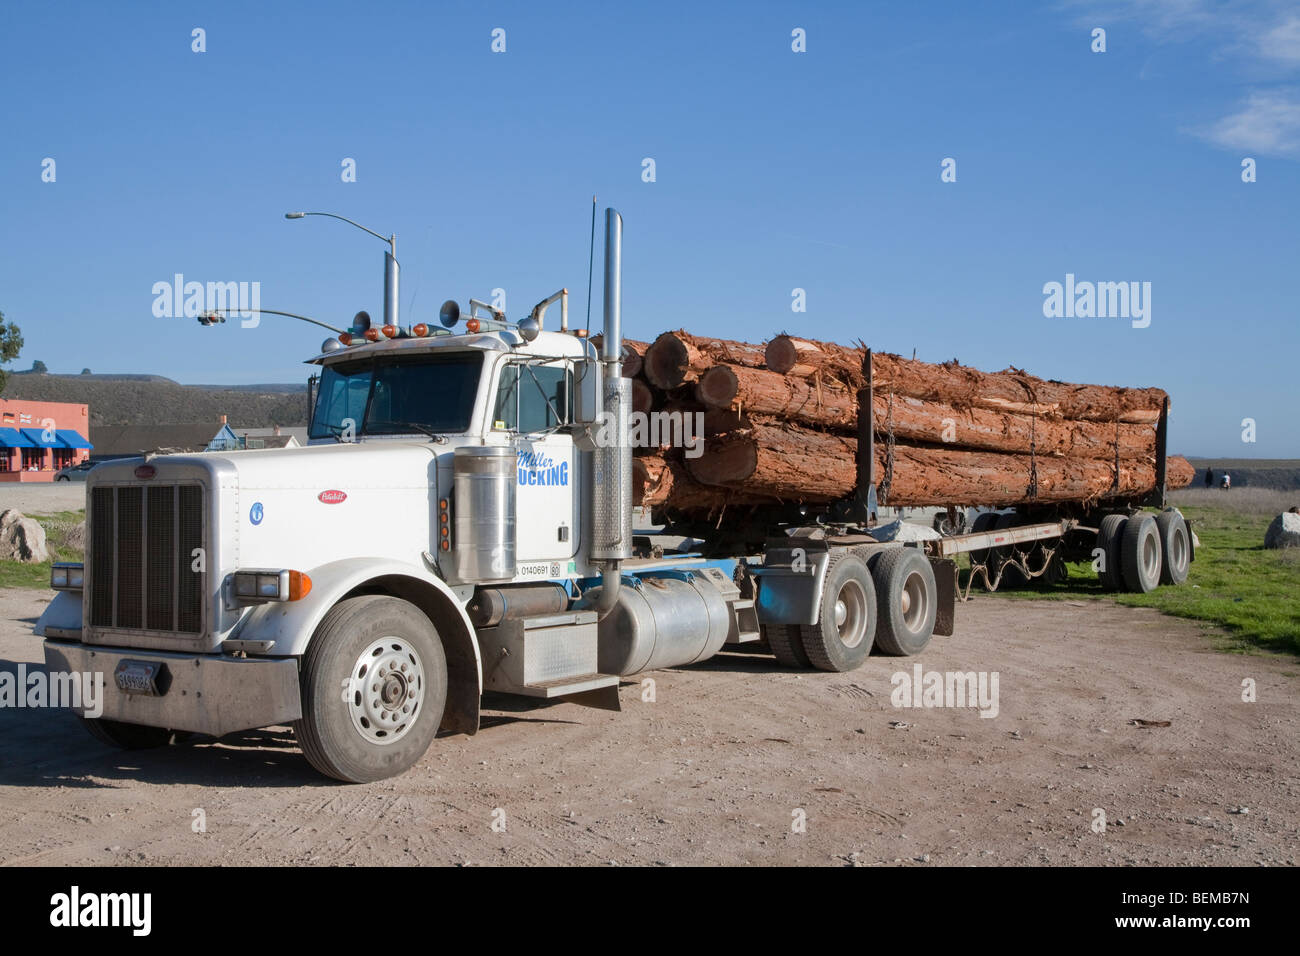 A logging truck carrying redwood tree trunks in Davenport, California, USA. Stock Photo